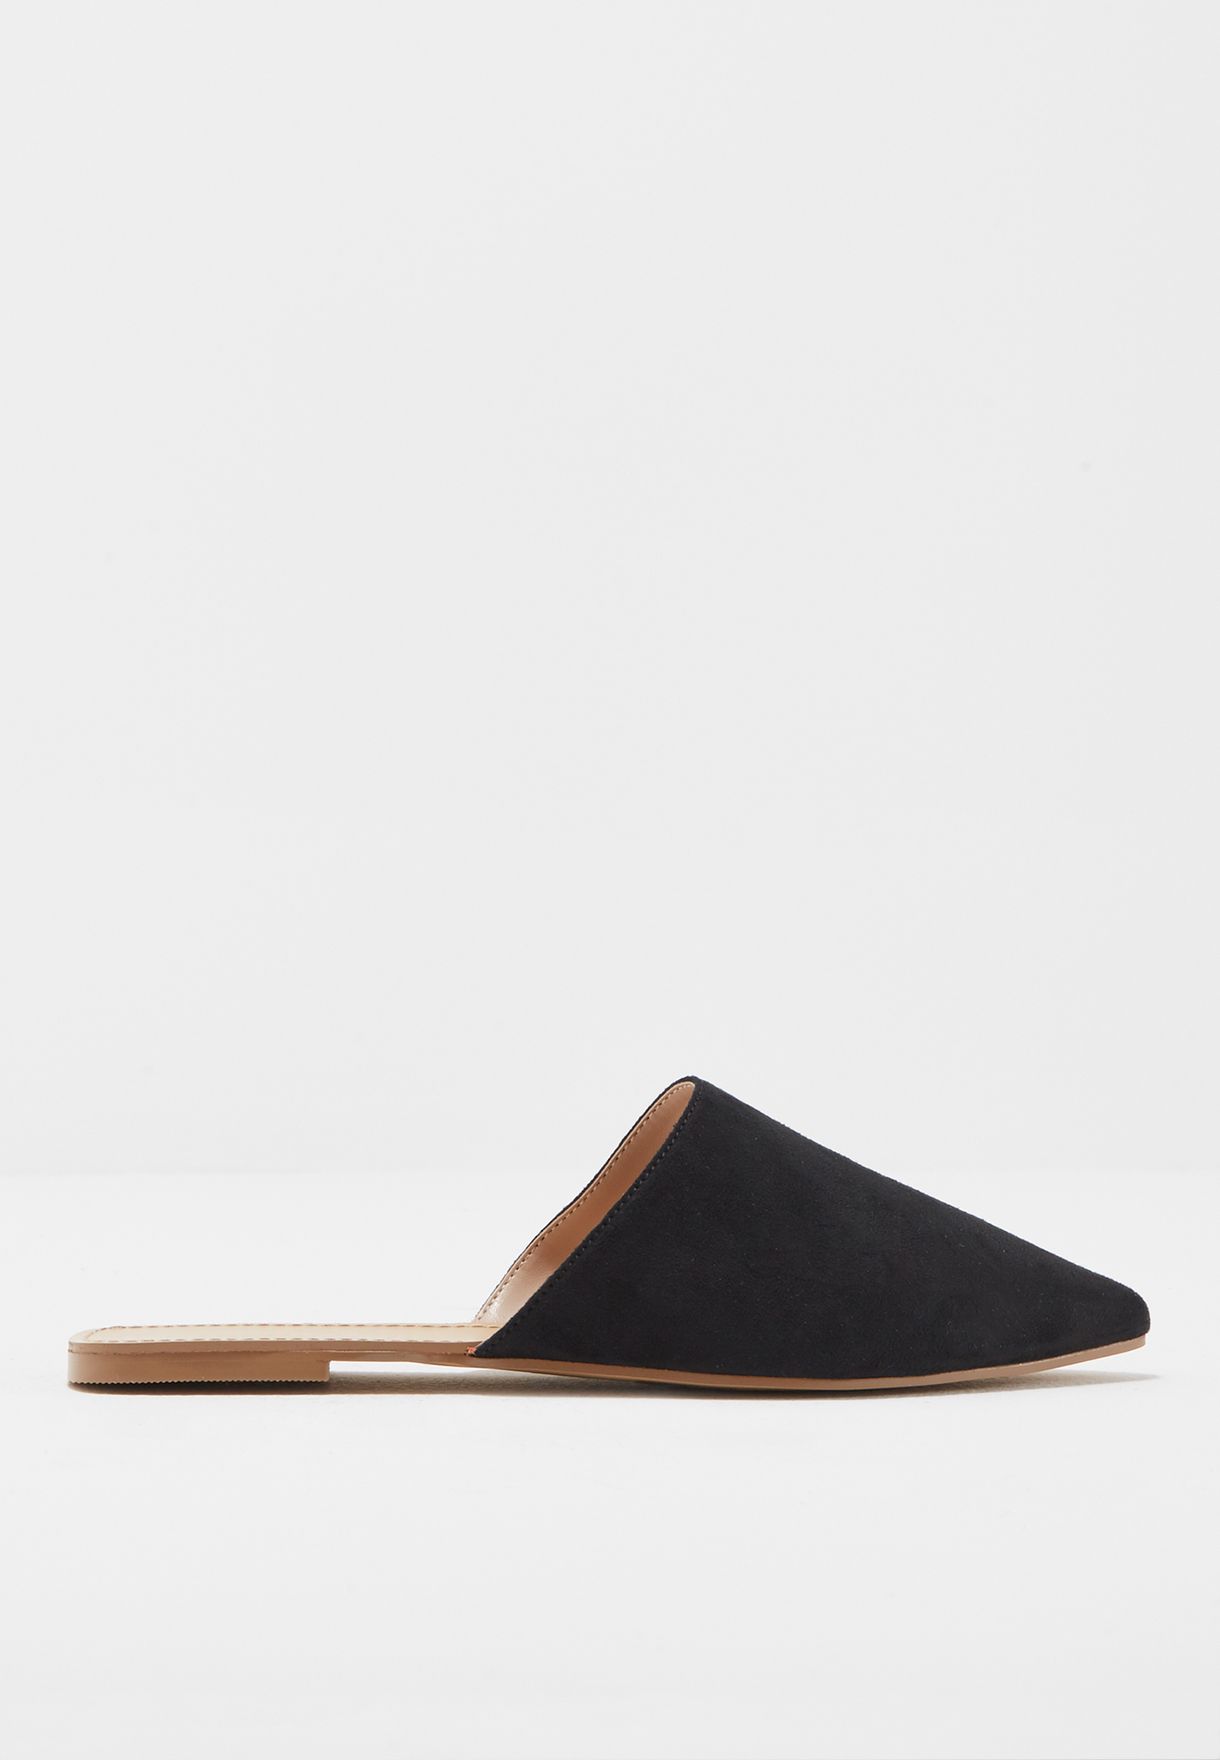 forever 21 pointed flats